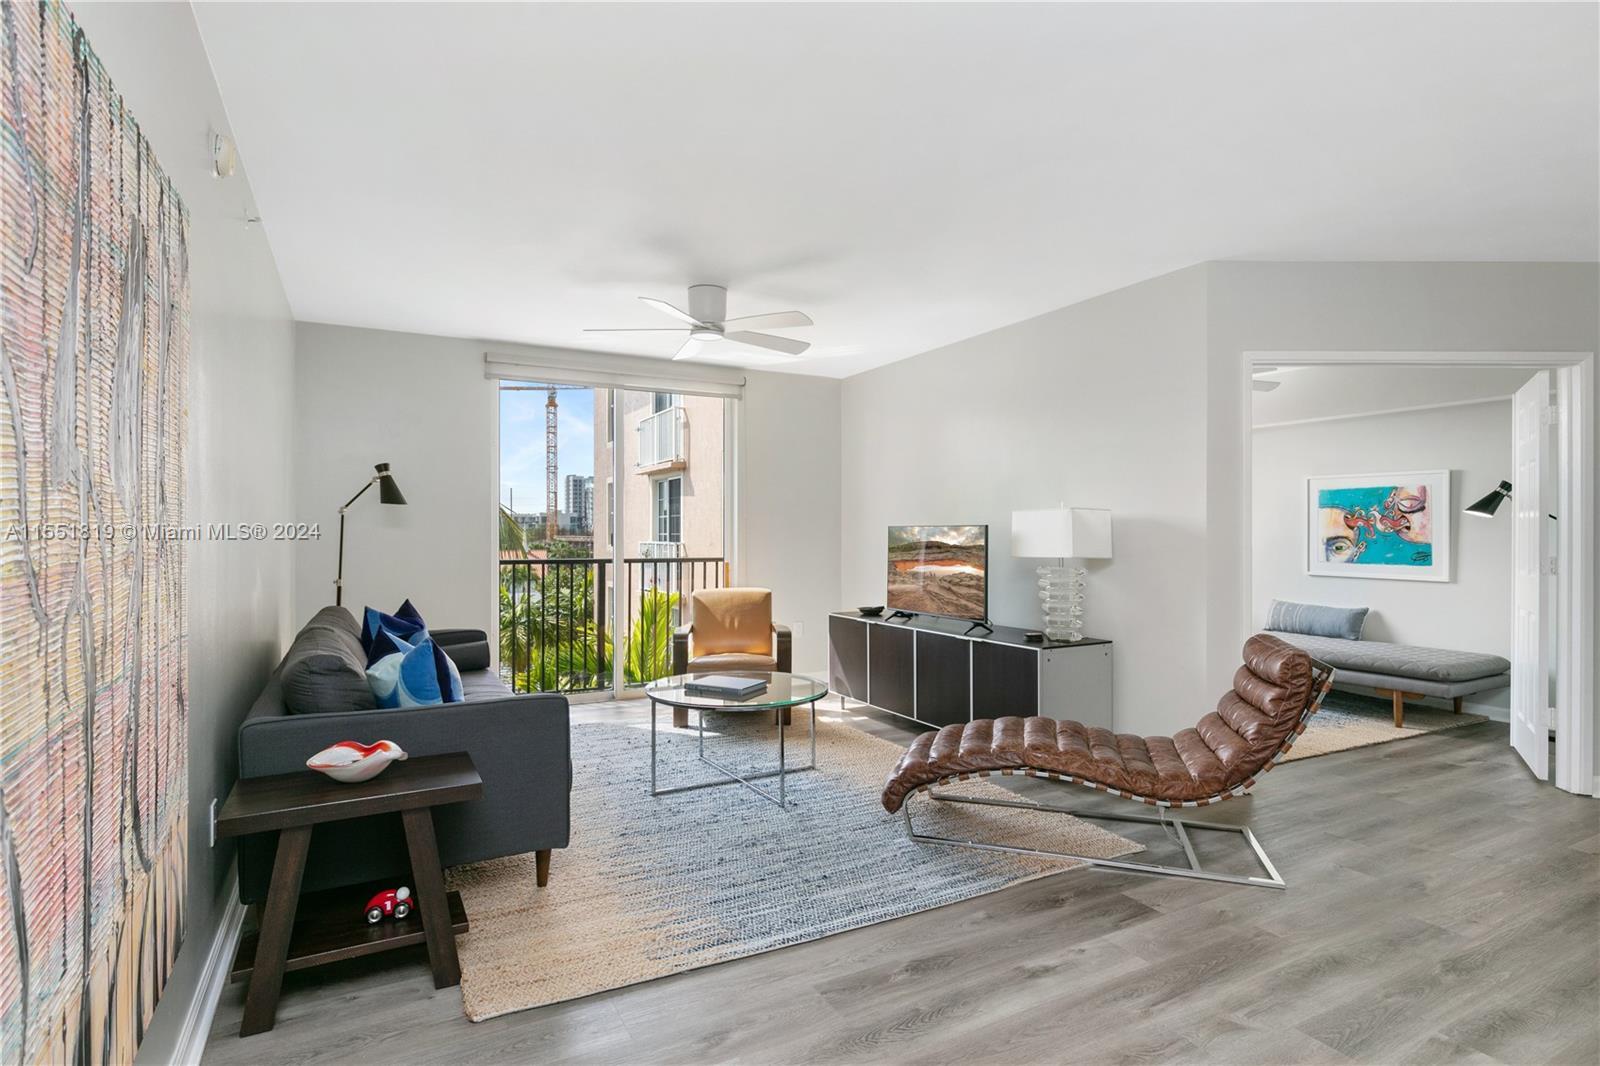 Introducing your Hollywood Oasis: A stunning 3-bed, 2-bath condo spanning 1277 sq ft. Relax in the s